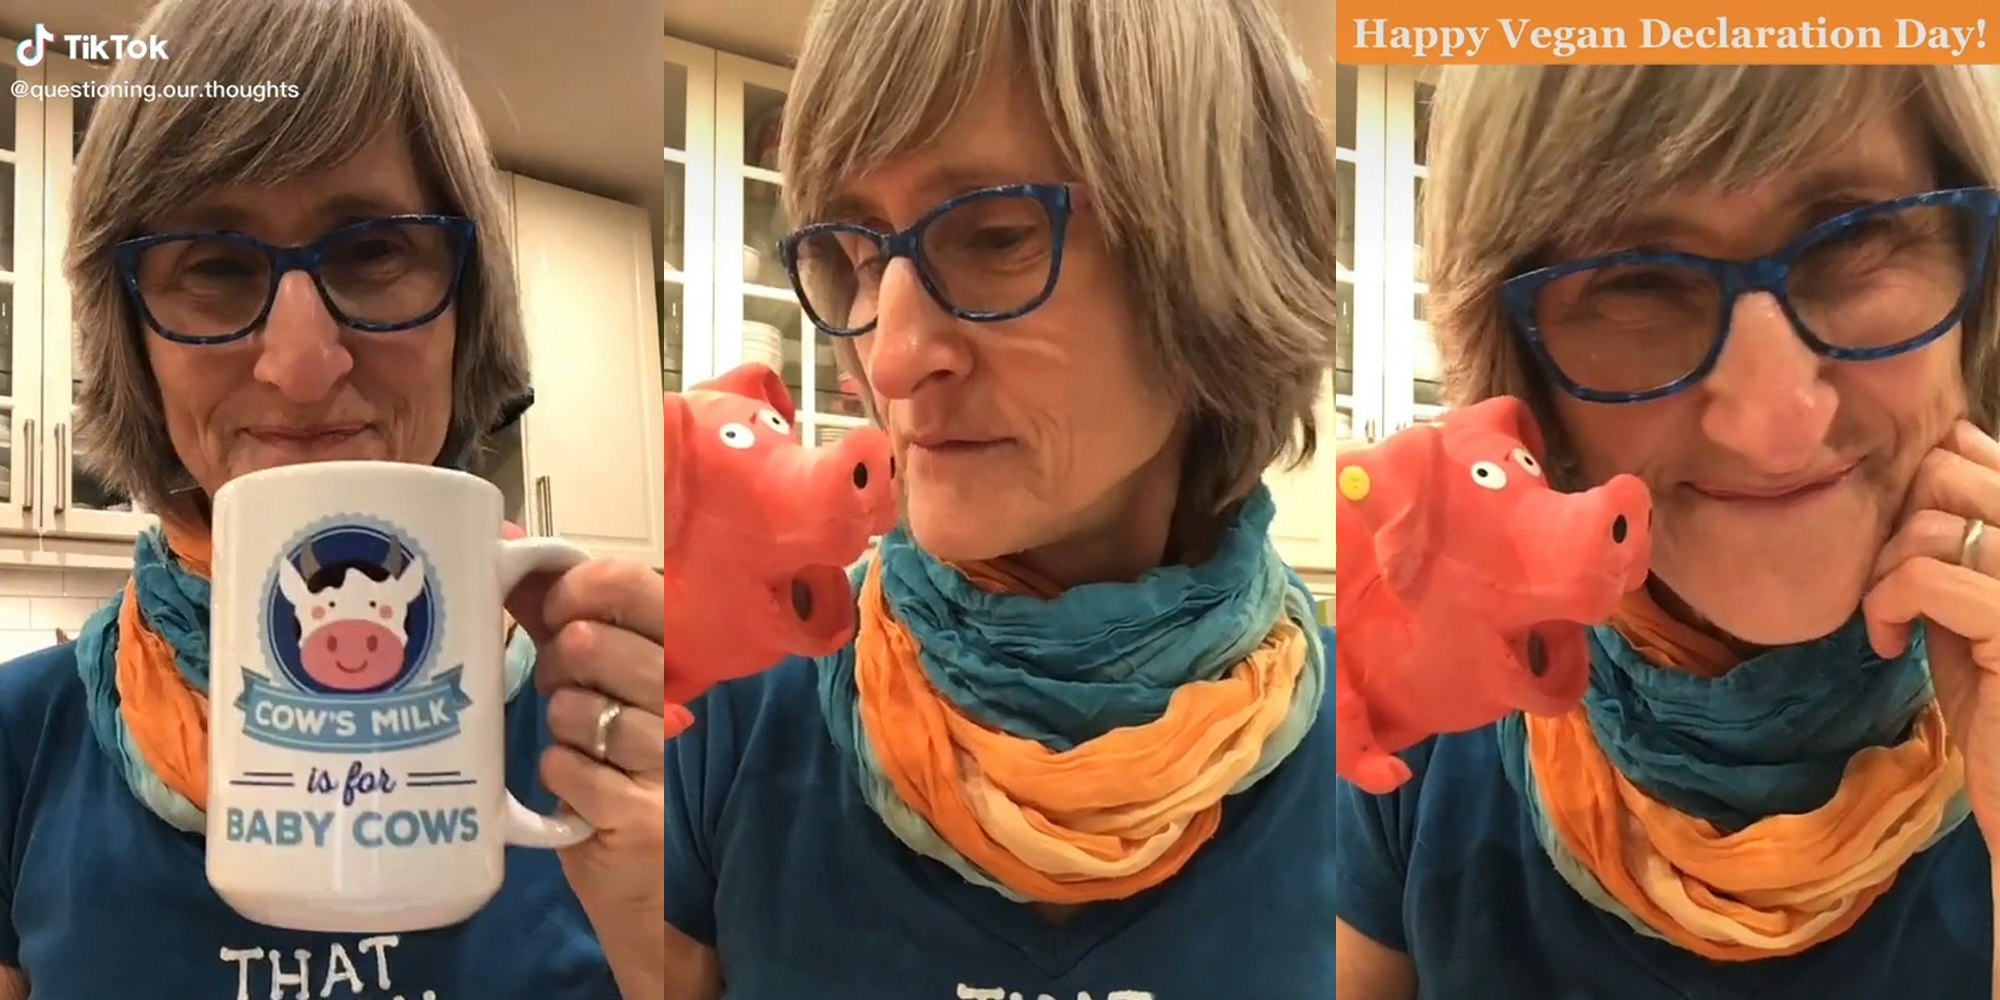 woman drinking from a mug that reads "Cow's milk is for baby cows" (l) playing with a plastic pig (c) "Happy Vegan Declaration Day!" cpation with woman smiling holding toy pig